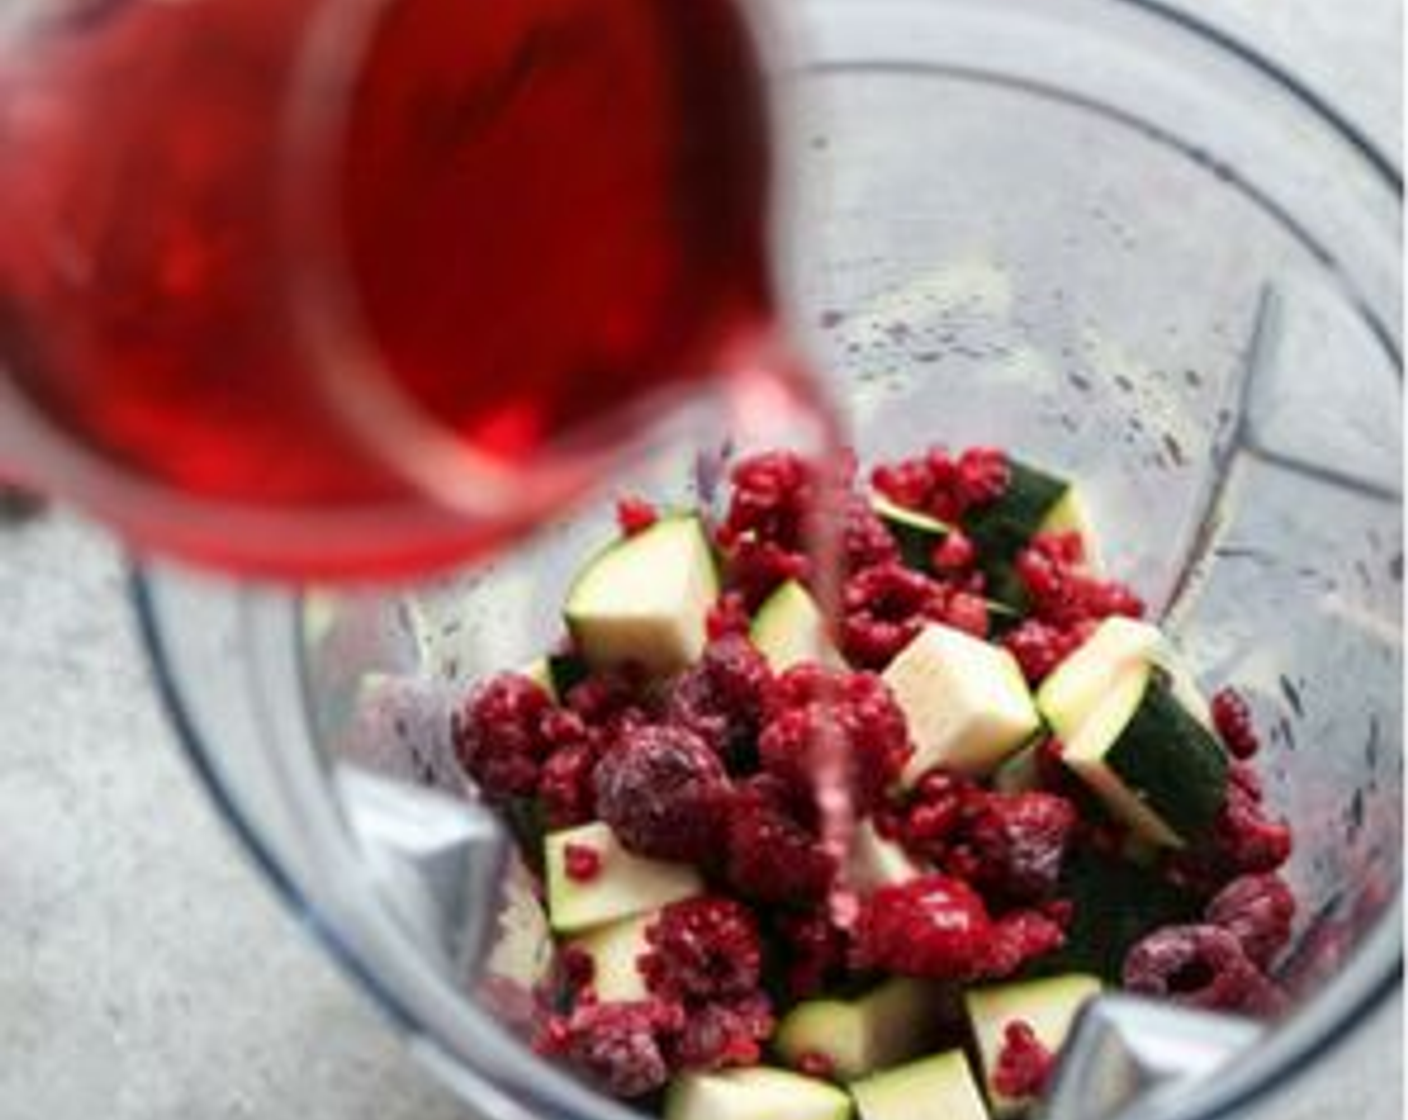 step 2 In a blender bowl, combine the Fresh Ginger (1/2 in), Zucchini (1), Frozen Raspberries (1/2 cup), Almond Milk (1/2 cup) and hibiscus concentrate. Puree until smooth, adding more hibiscus concentrate or nut milk until you reach your desired consistency.